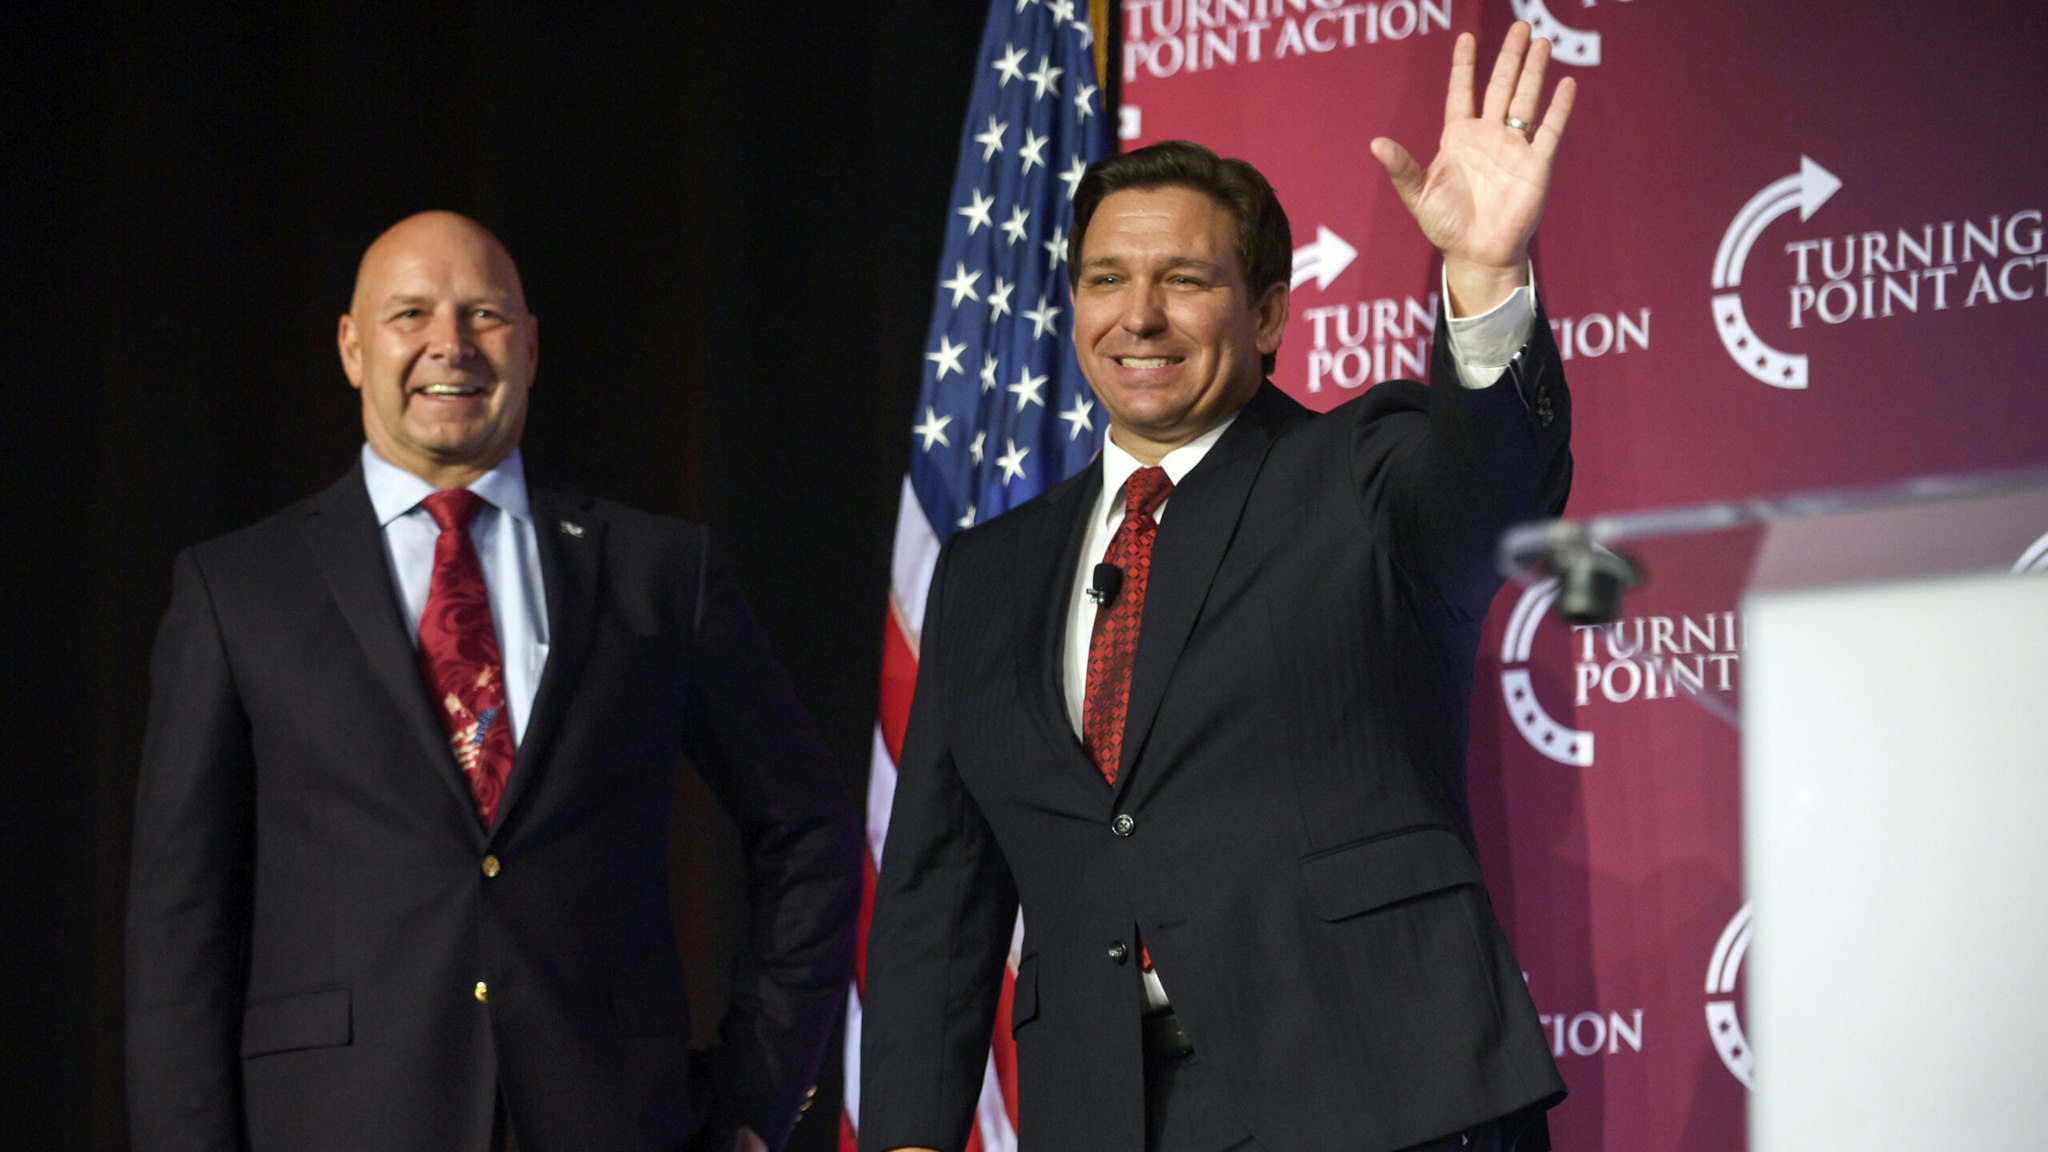 PITTSBURGH, PA - AUGUST 19: Florida Gov. Ron DeSantis speaks at the Unite and Win Rally in support of Pennsylvania Republican gubernatorial candidate Doug Mastriano at the Wyndham Hotel on August 19, 2022 in Pittsburgh, Pennsylvania. During his visit to the state, DeSantis urged Republican voters to stand behind Doug Mastriano.